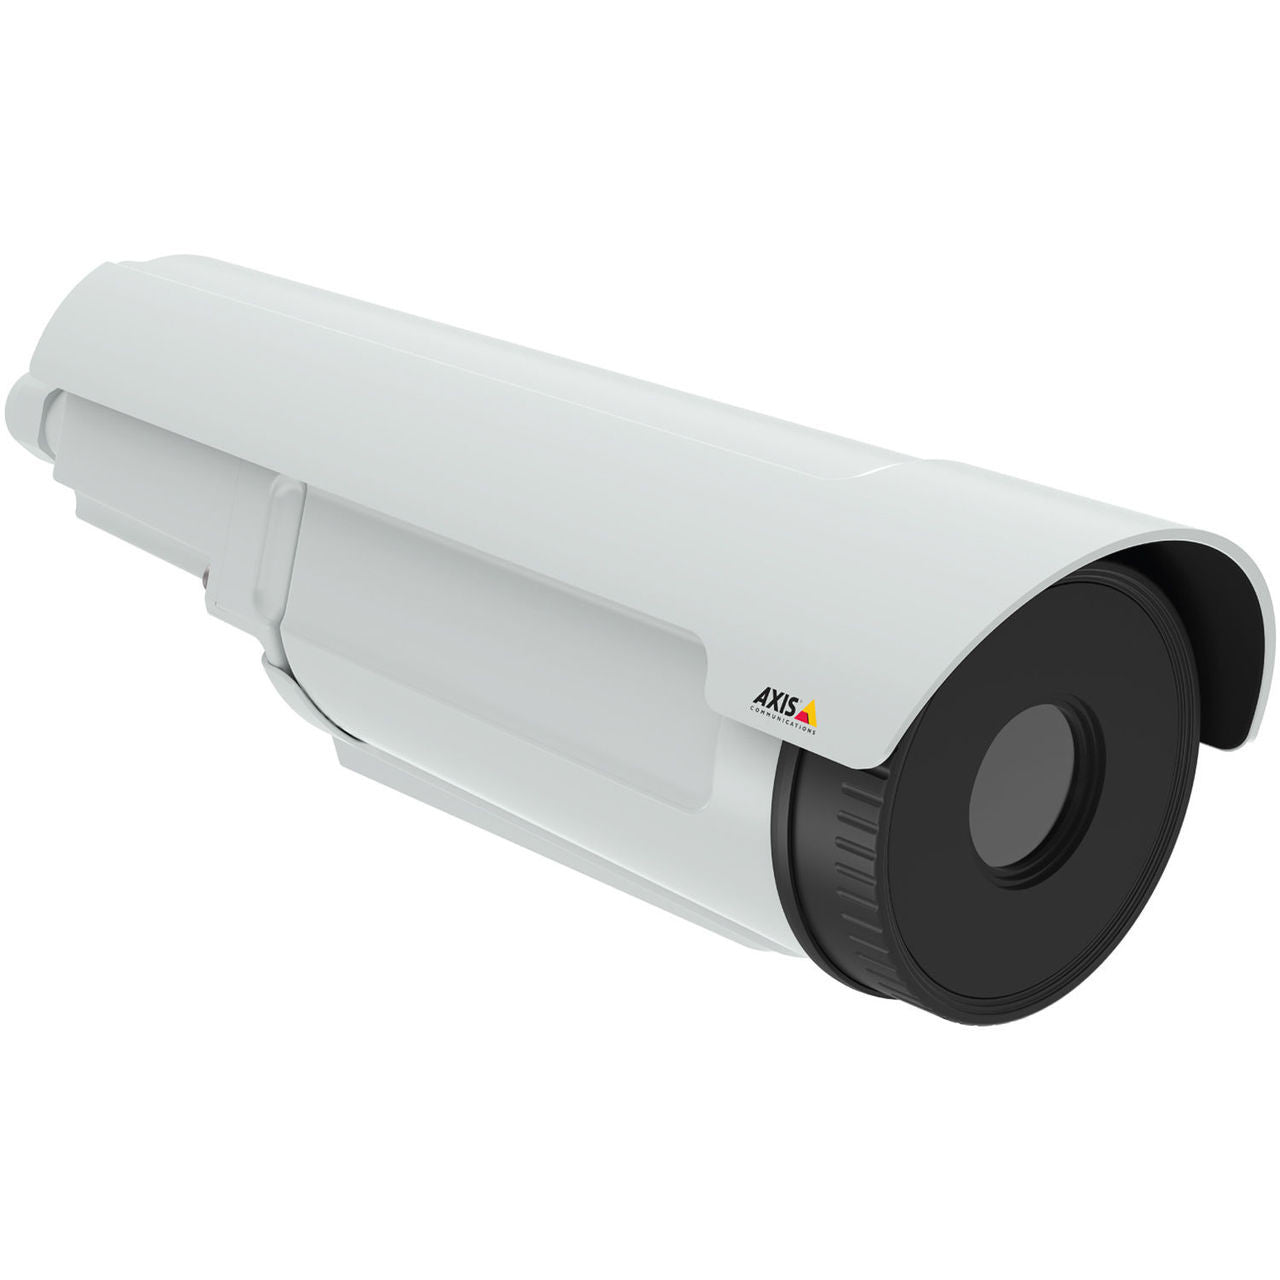 AXIS Q1941-E PT Mount (0973-001)7mm 30fps Thermal Network Camera